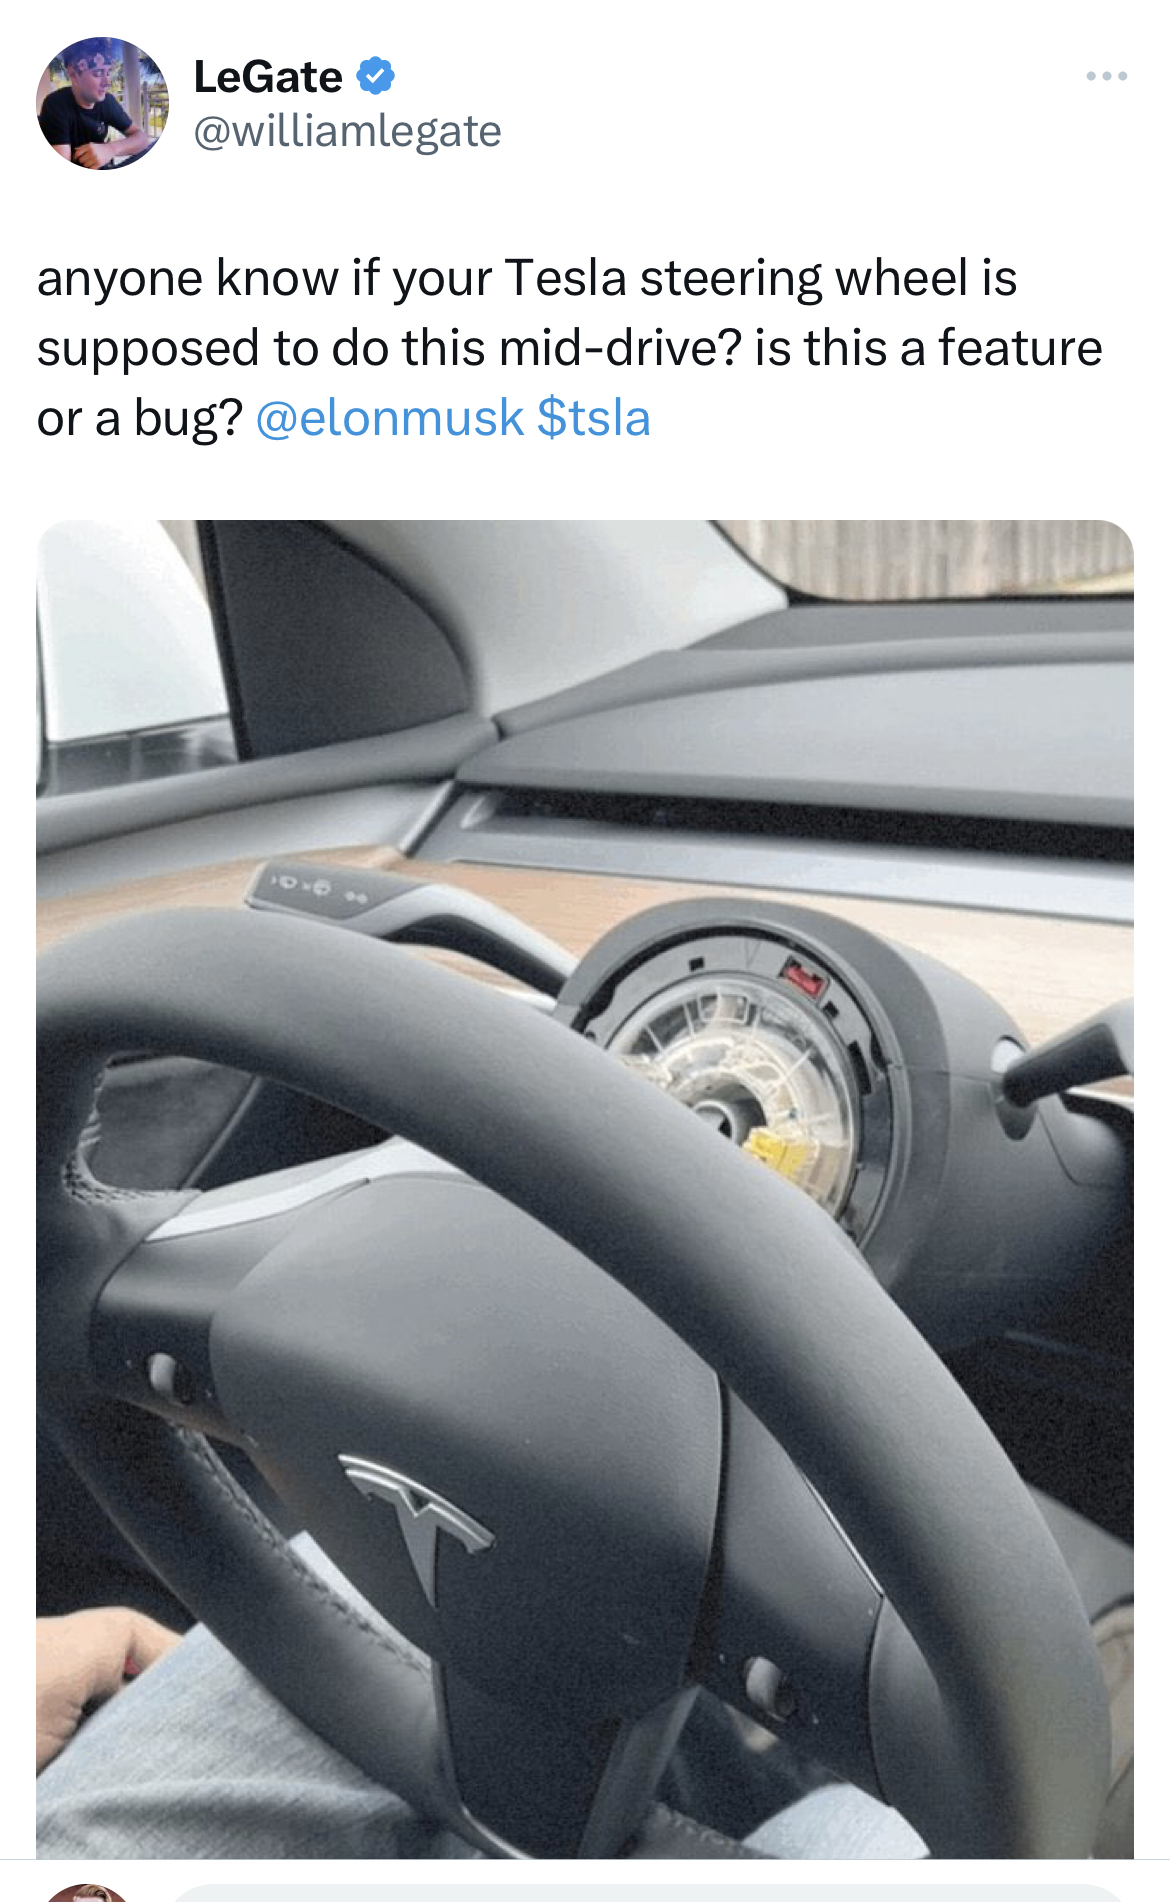 savage tweets - LeGate anyone know if your Tesla steering wheel is supposed to do this middrive? is this a feature or a bug? $tsla